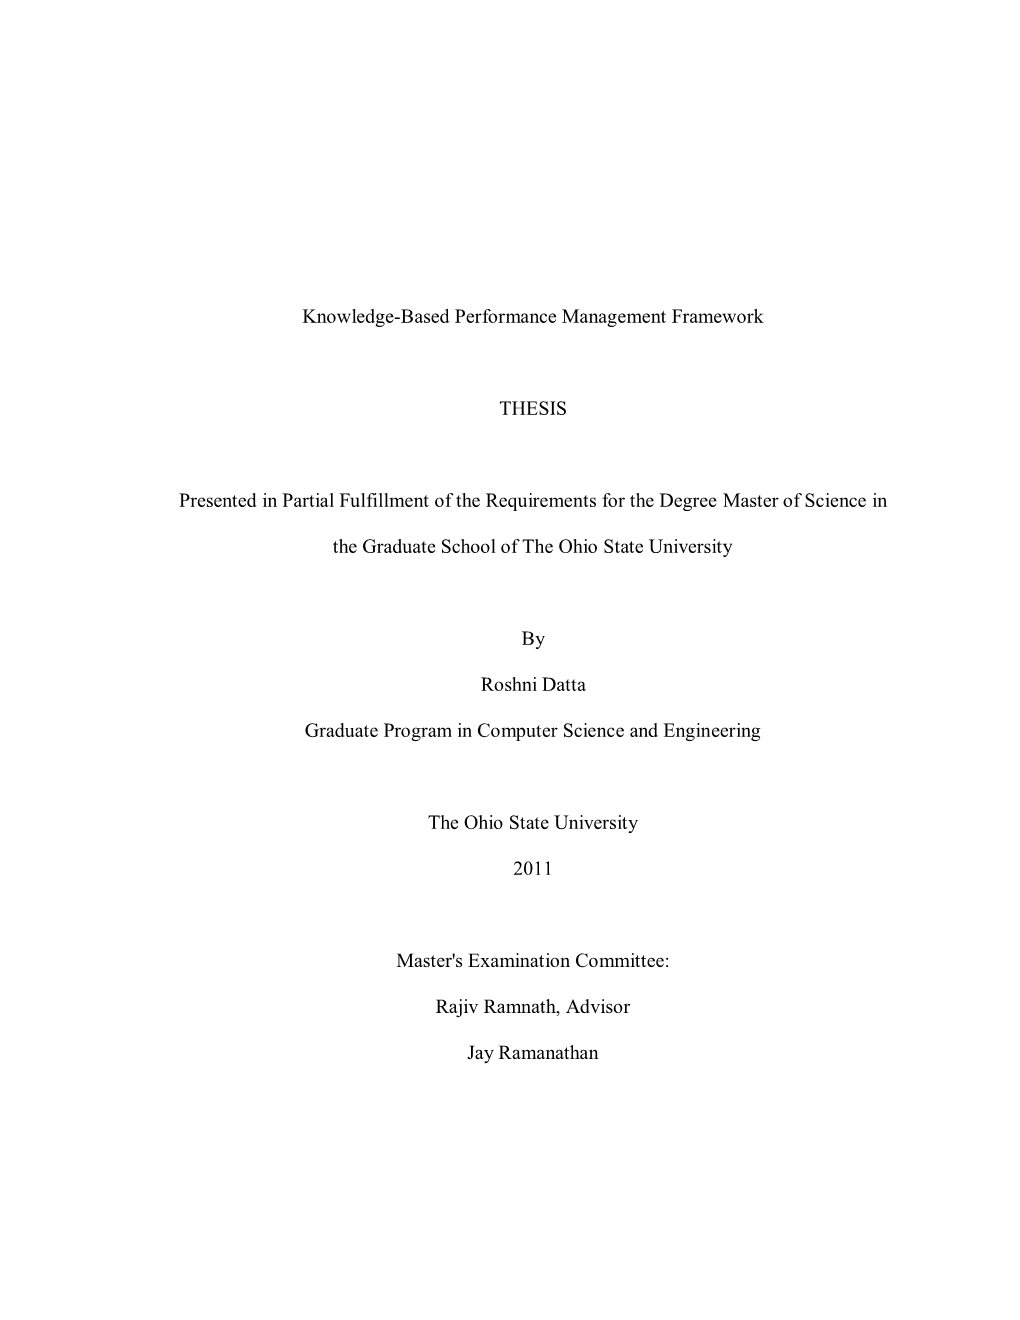 Knowledge-Based Performance Management Framework THESIS Presented in Partial Fulfillment of the Requirements for the Degree Mast